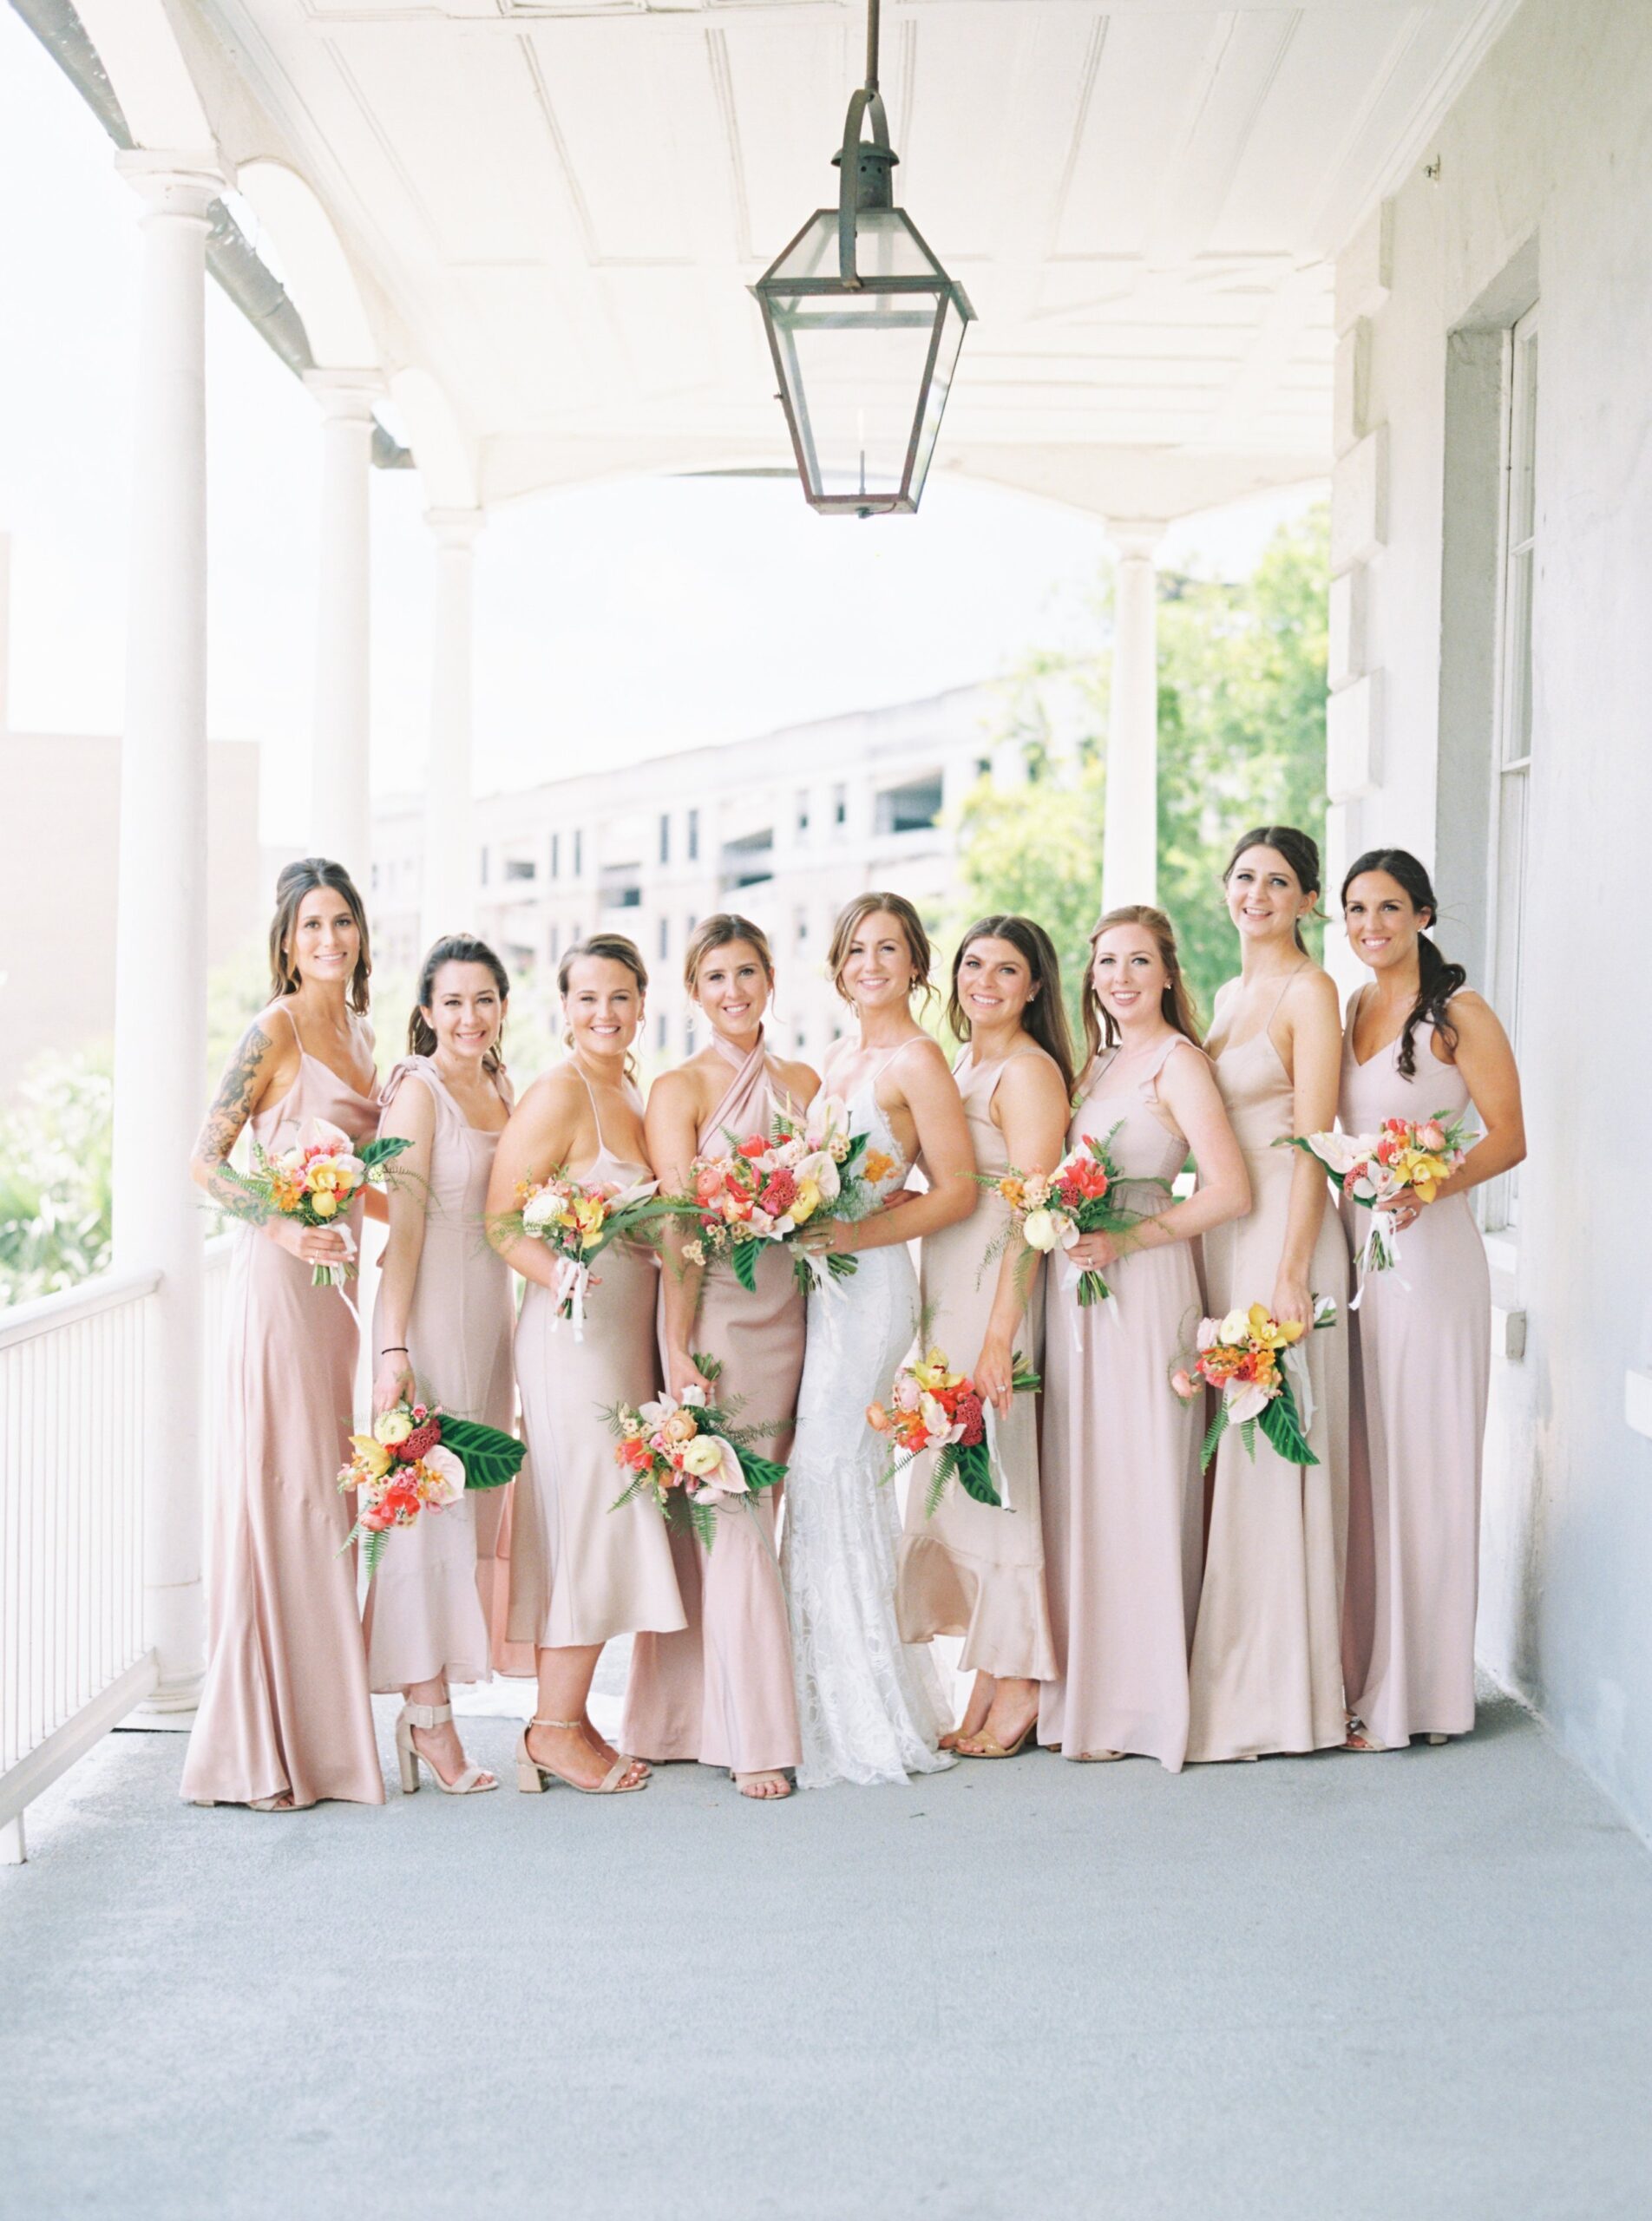 Bride and bridesmaids group photo. Bridesmaids in neutral tone with bright tropical flowers. Charleston spring wedding.